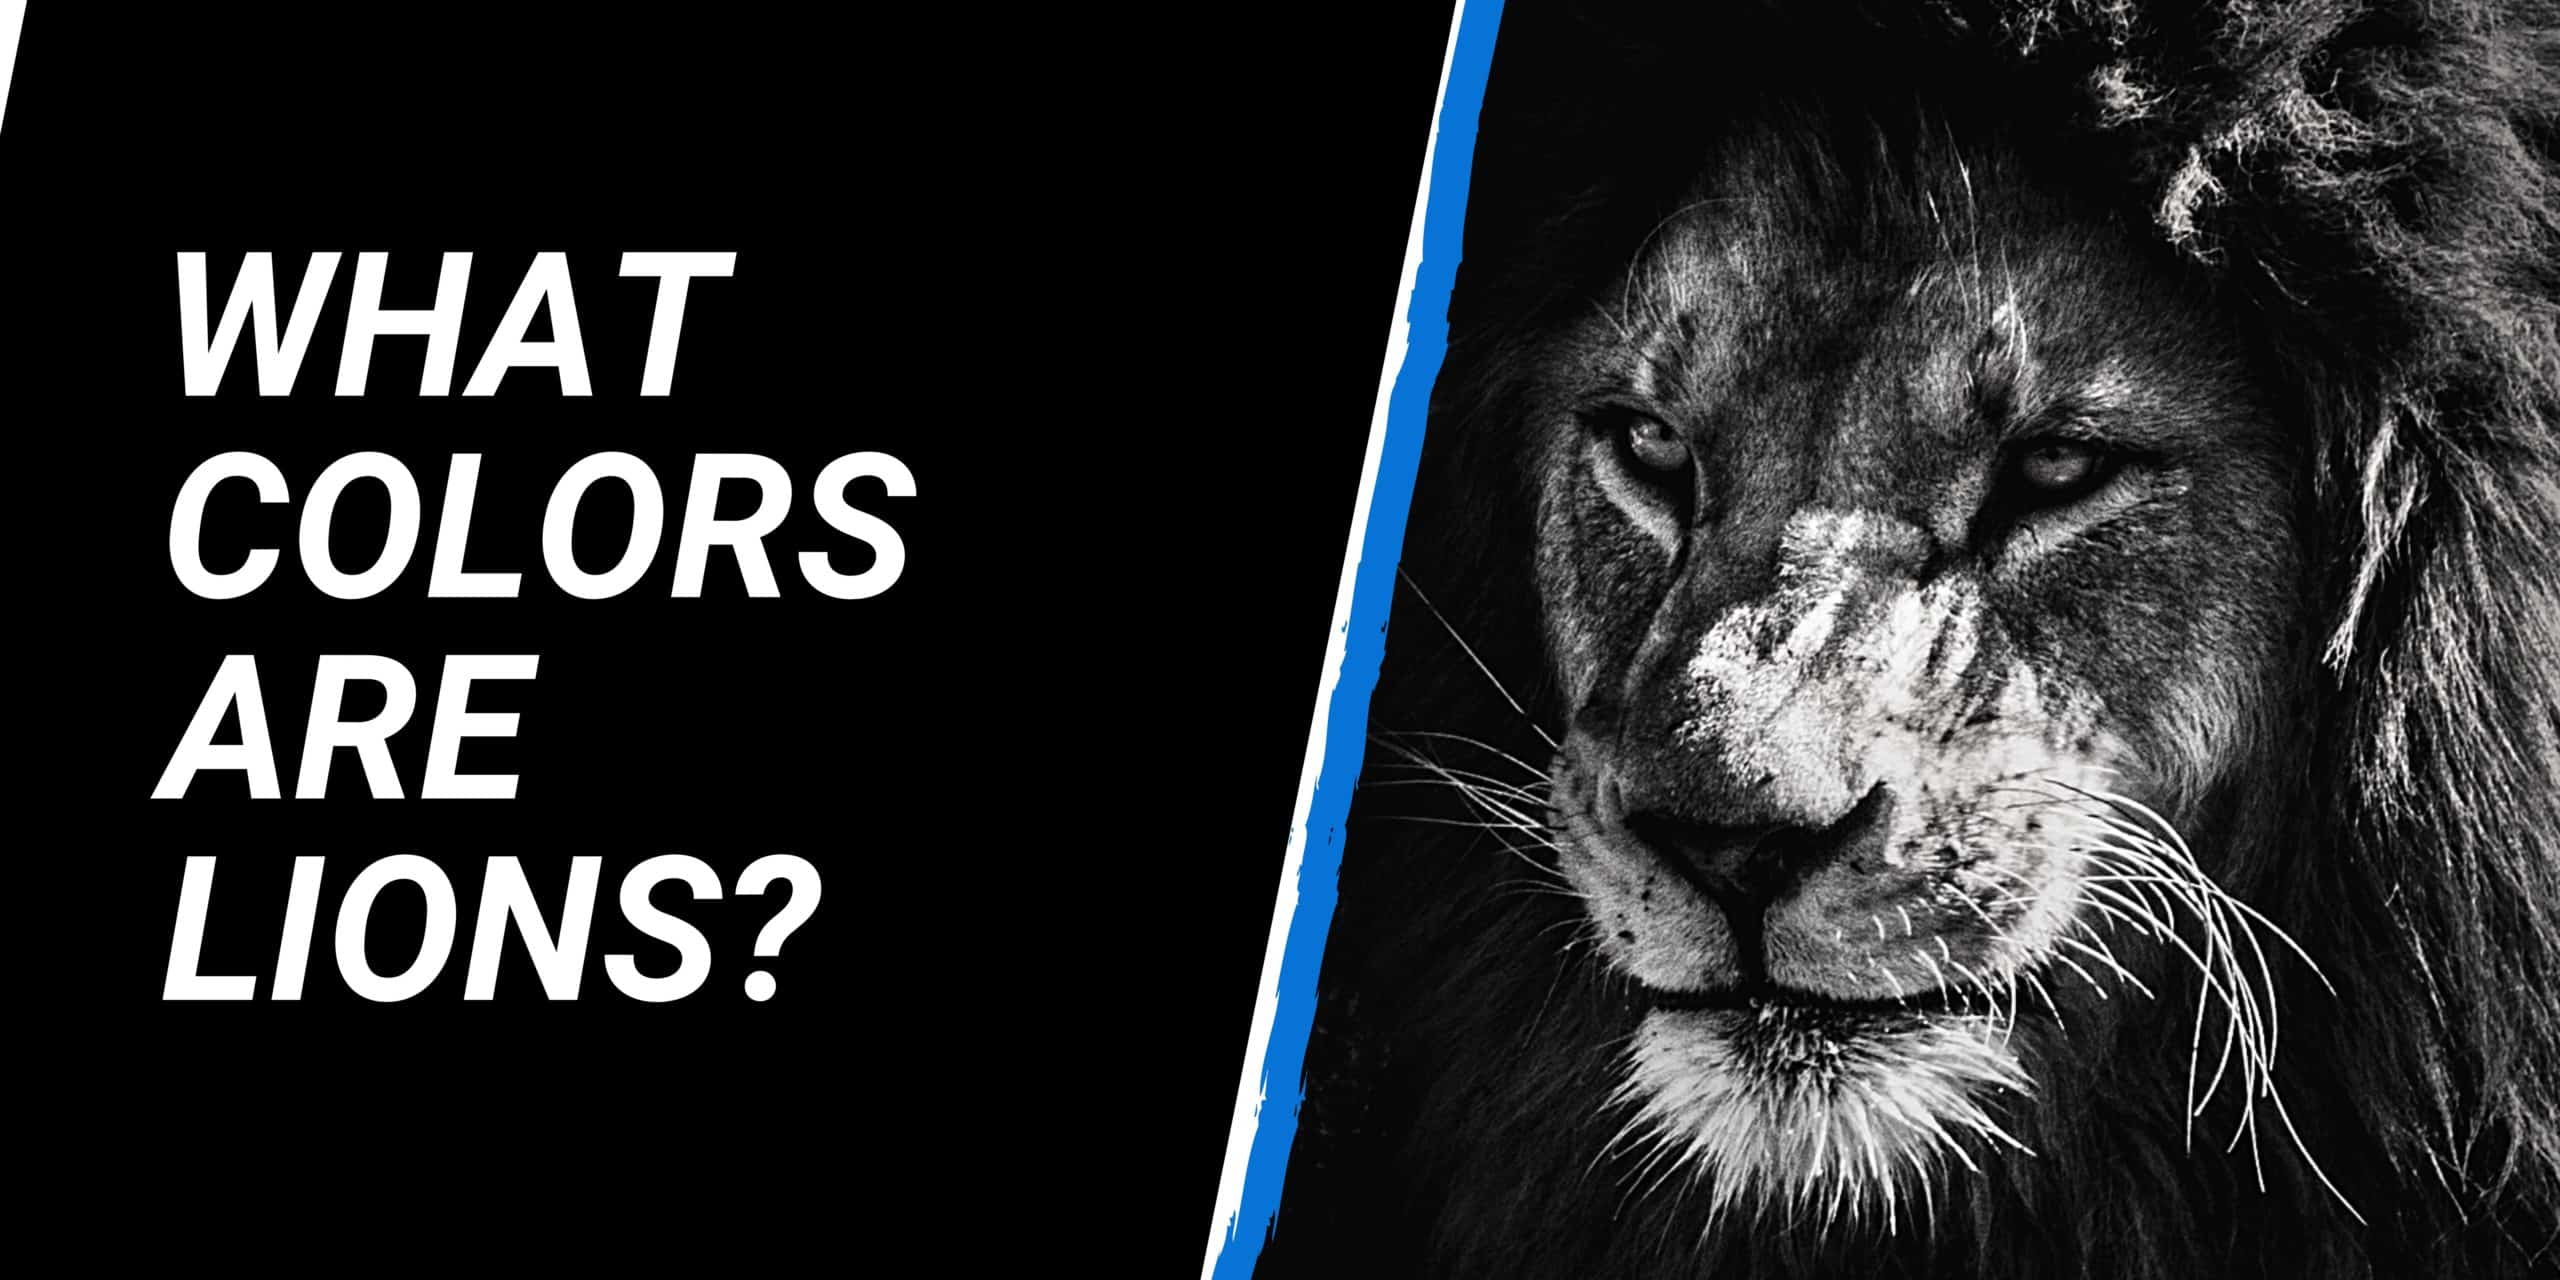 What colors are Lions?